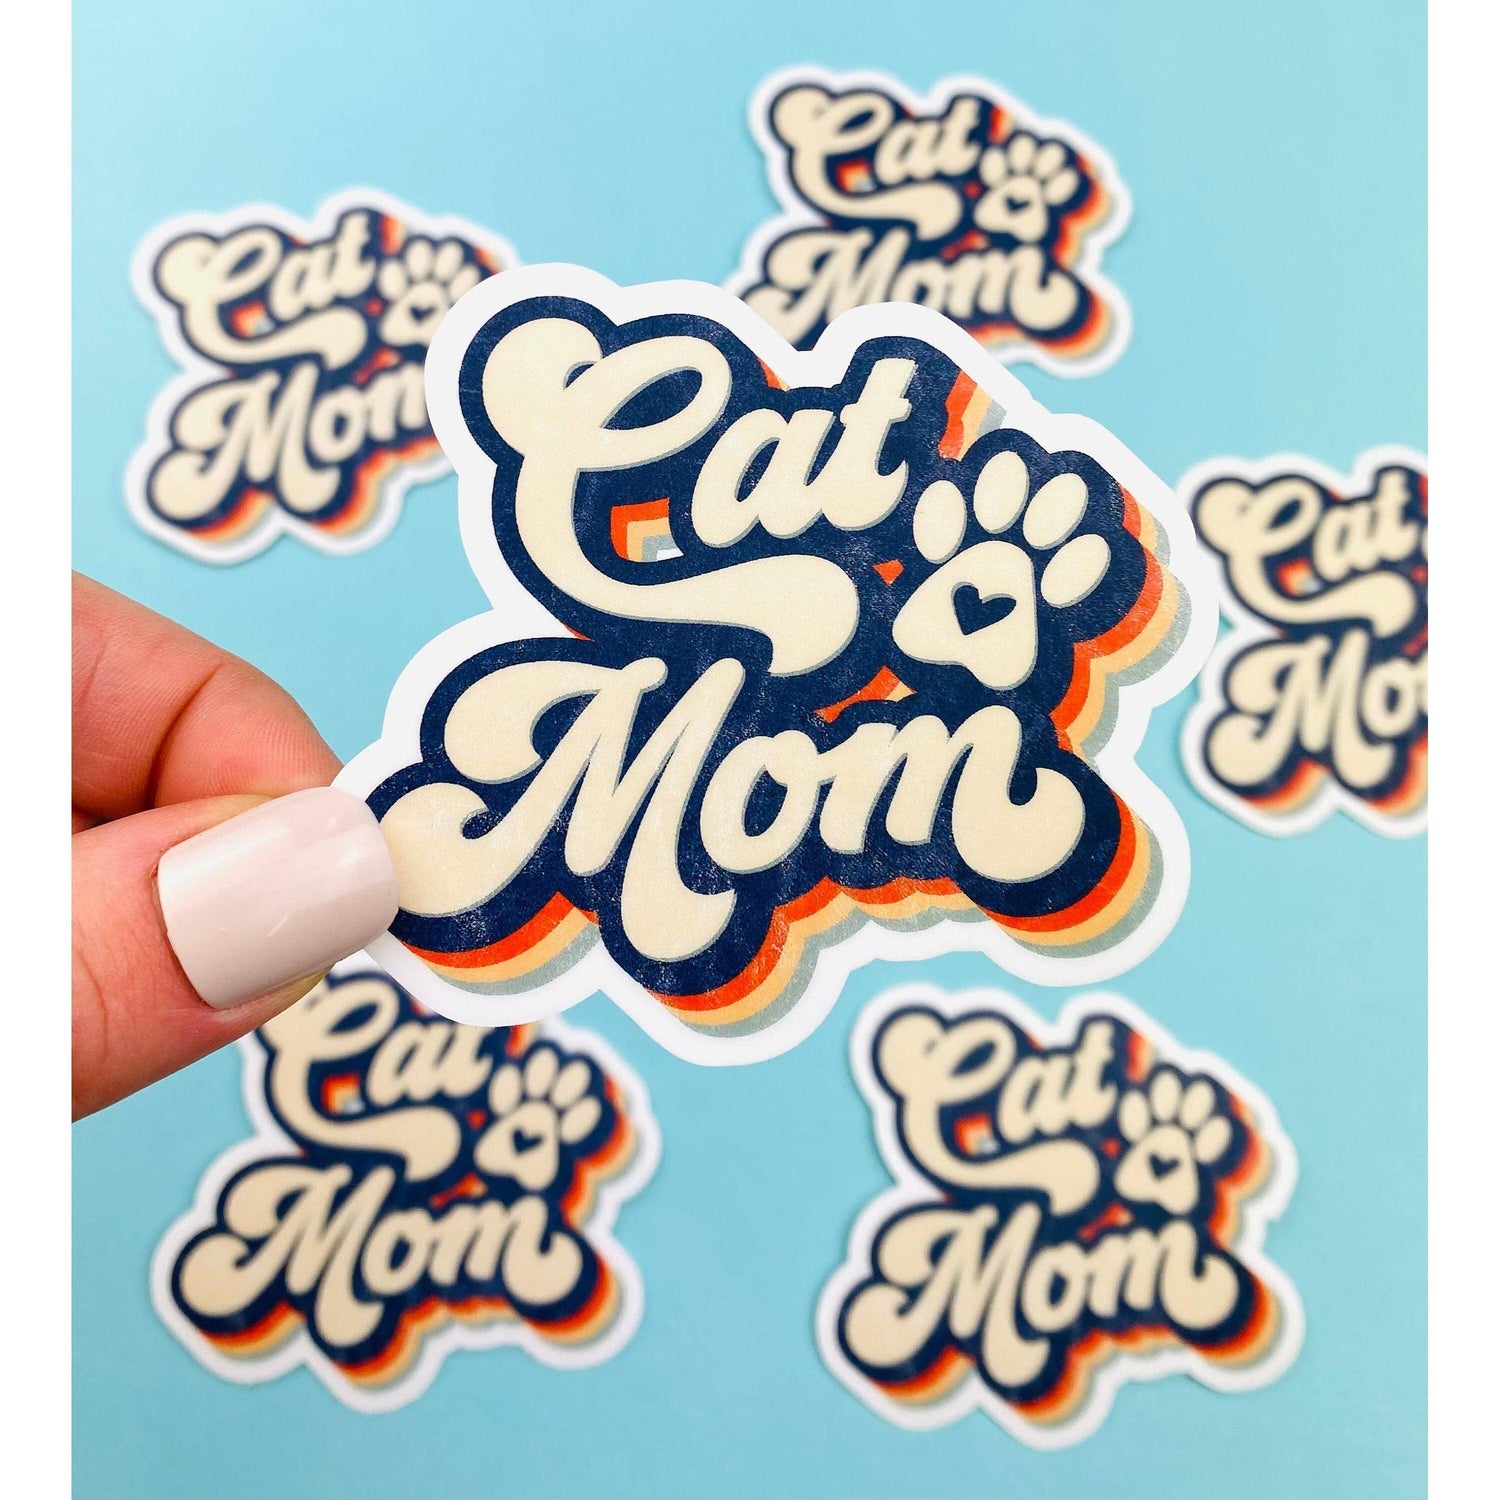 Retro Cat Mom Sticker Distress Vintage Look Sticker for Cat Lovers Cat Lover Gift for Kitty Owner, Kitty Sticker, Kitty Decals - Ottos Grotto :: Stickers For Your Stuff